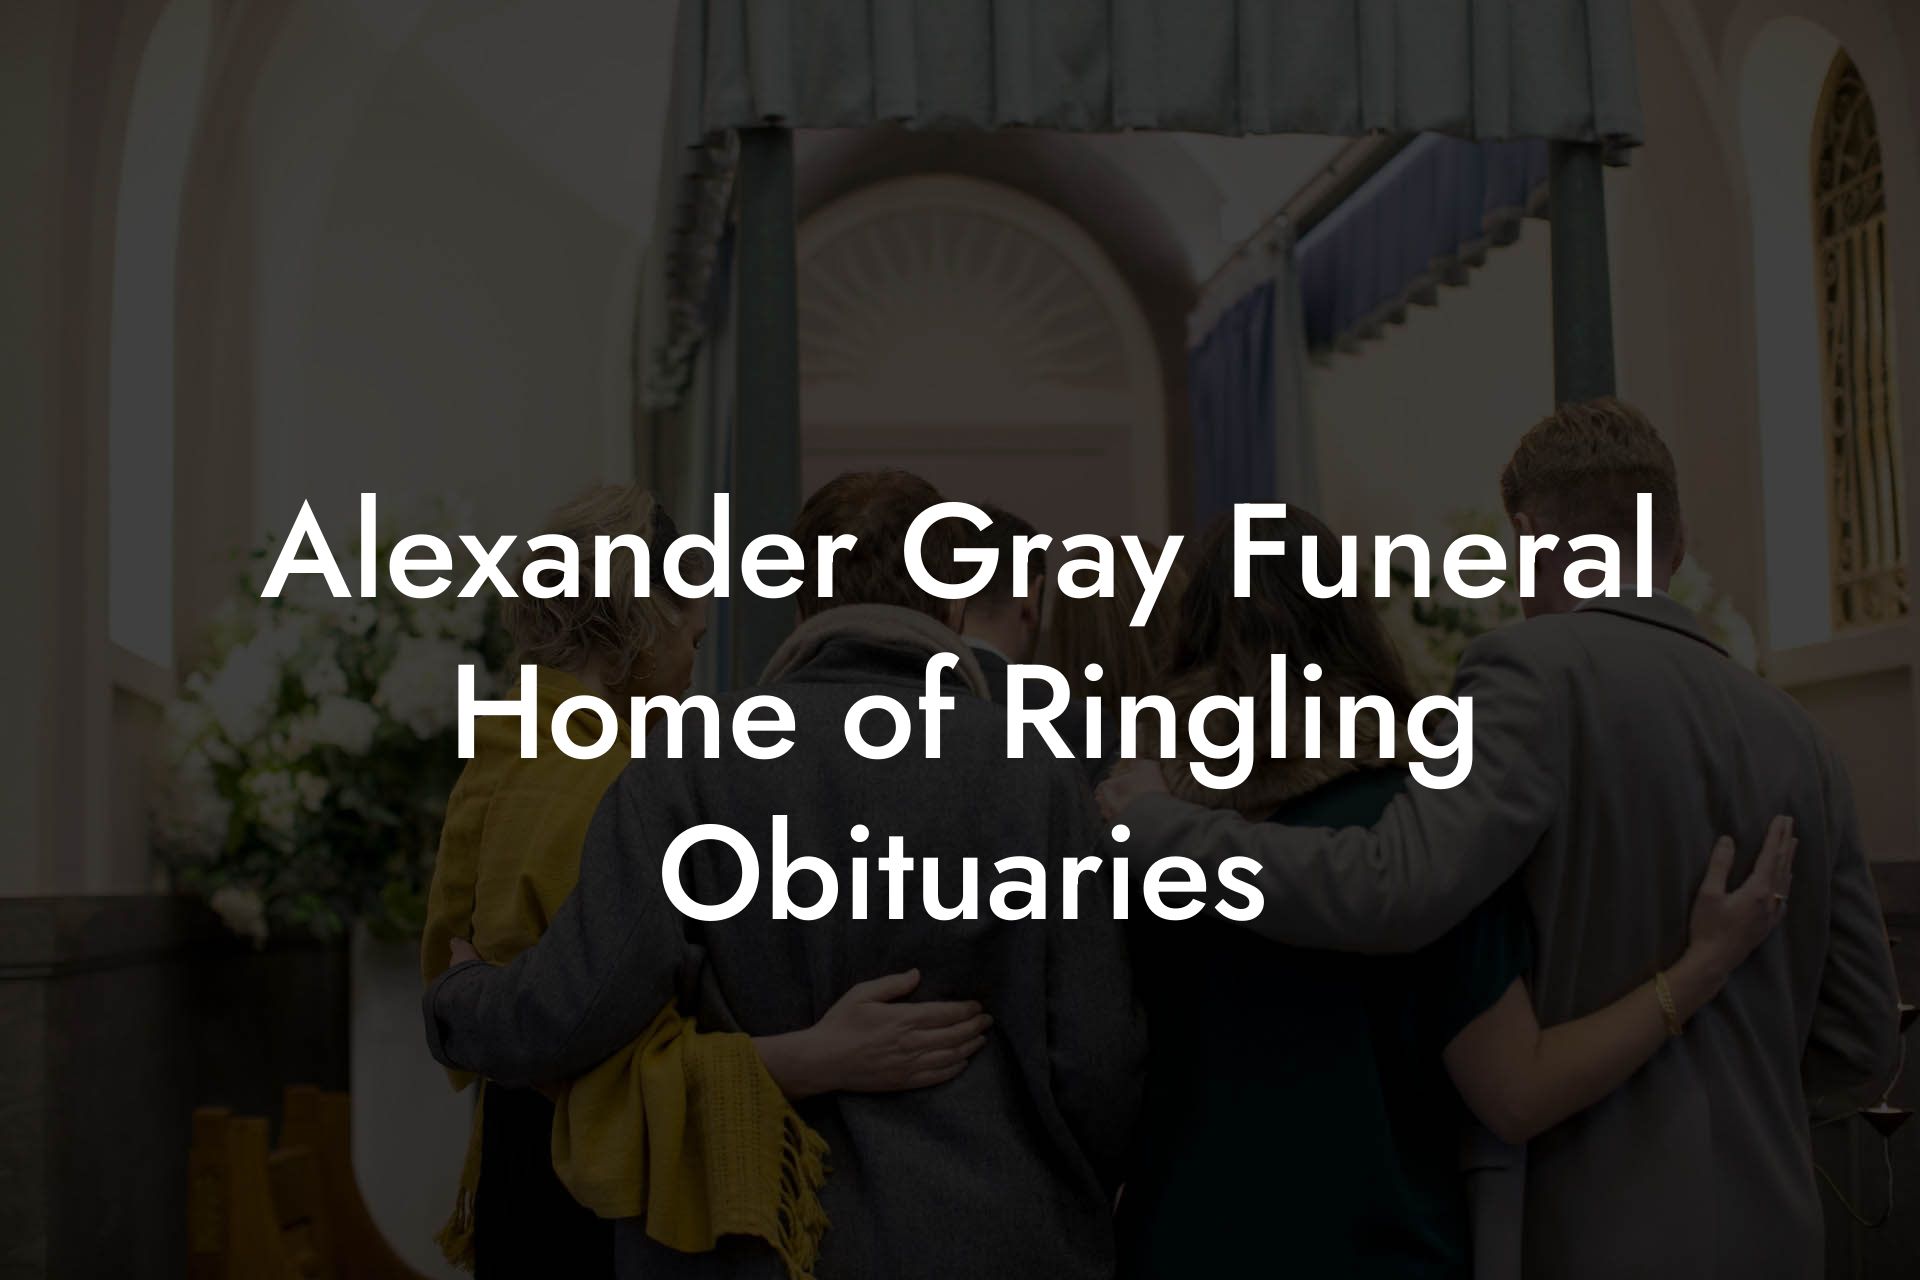 Alexander Gray Funeral Home of Ringling Obituaries